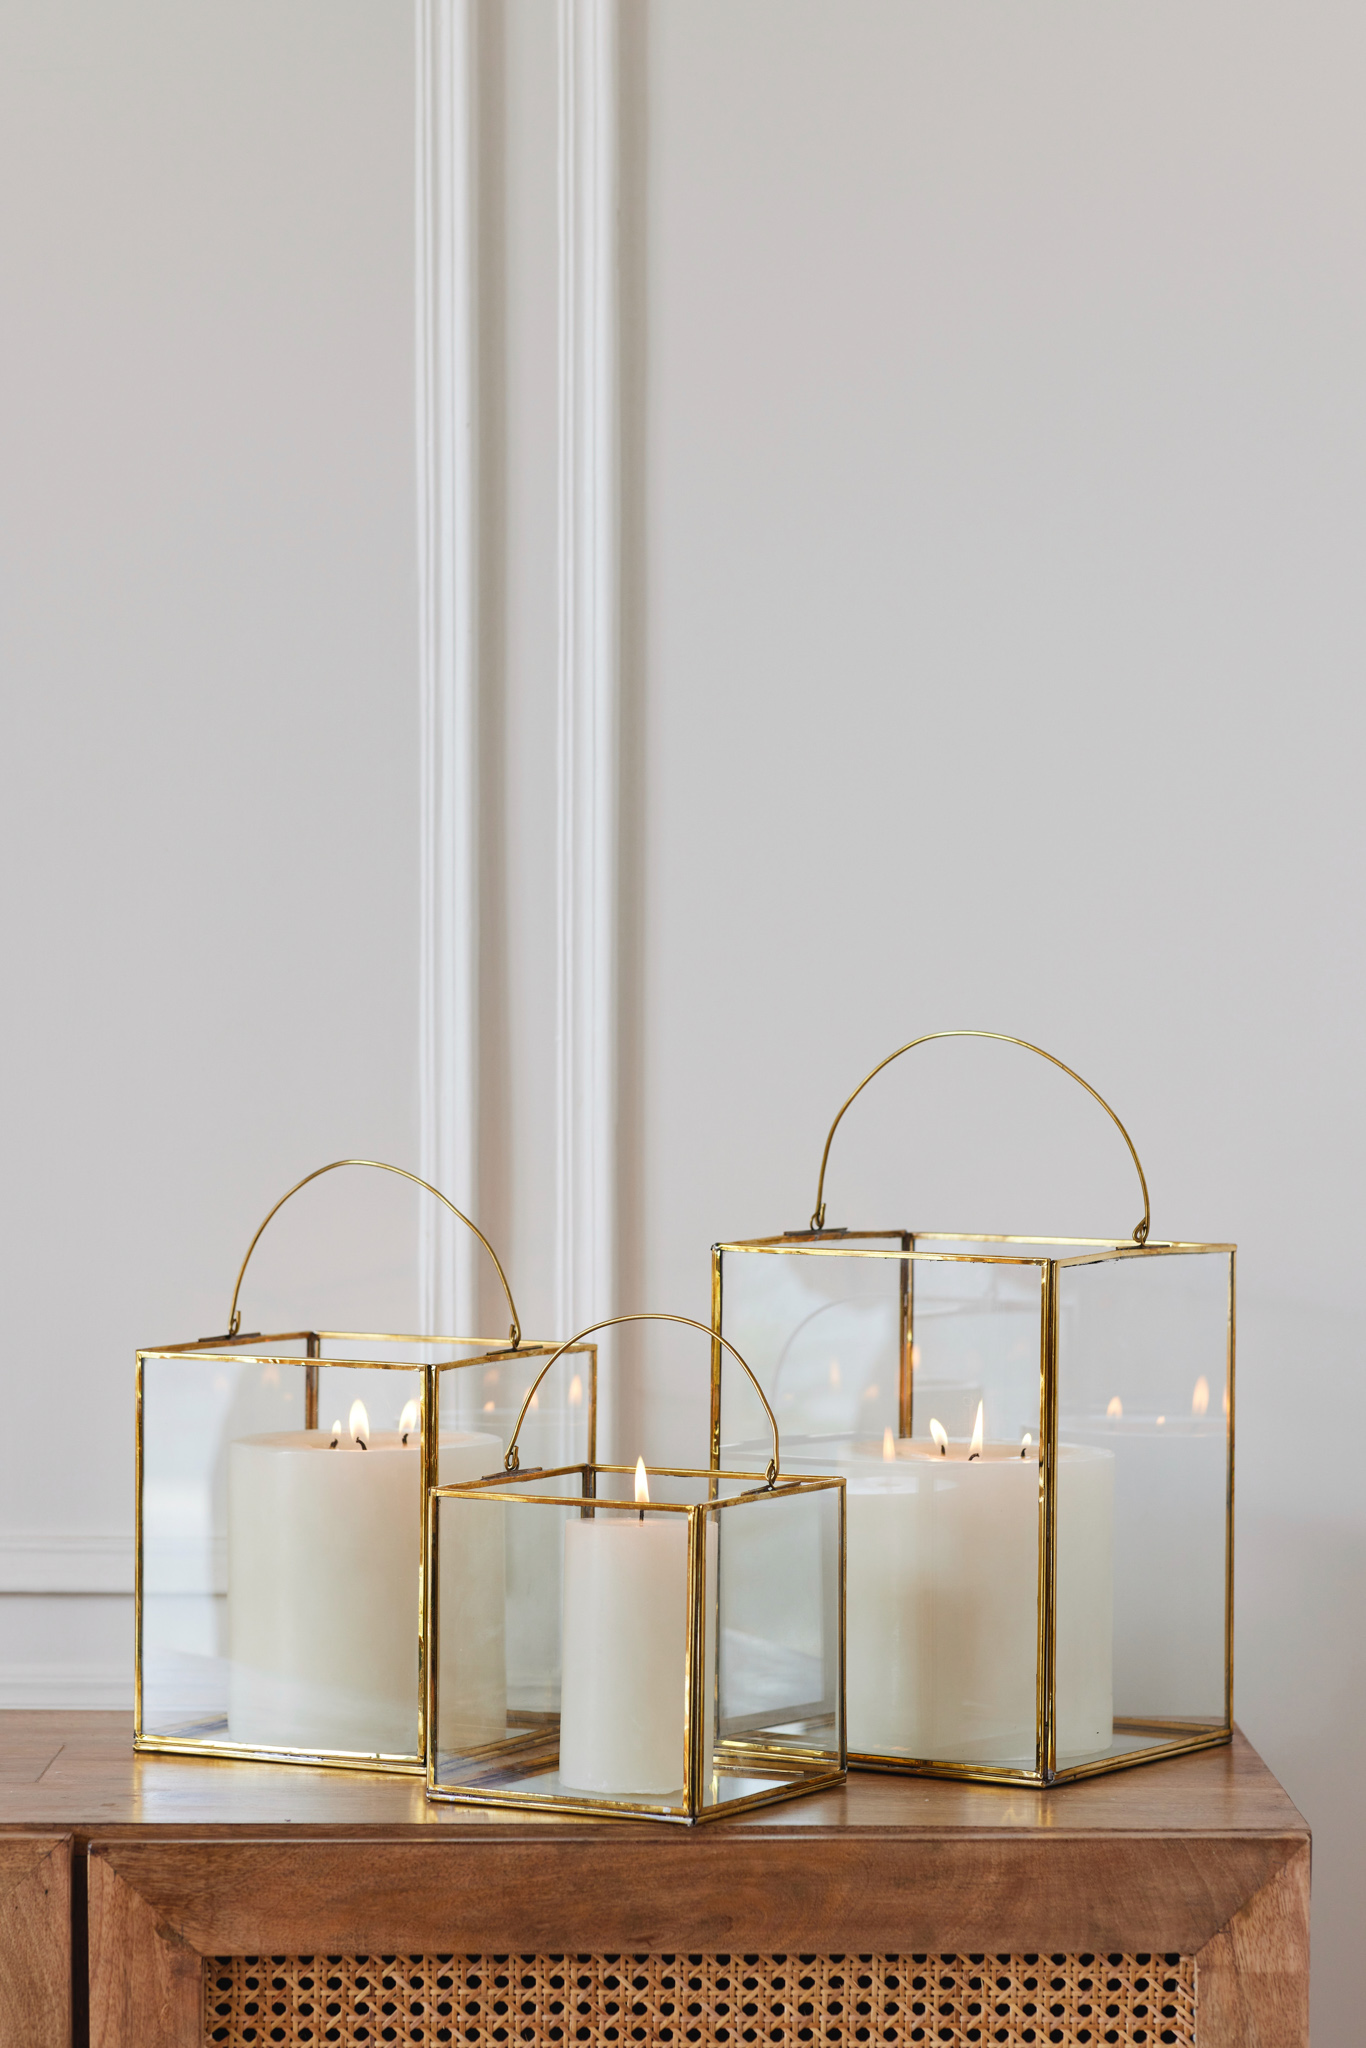 Make way for a balmy and ebullient holiday season with Fleck’s beautiful accent pieces